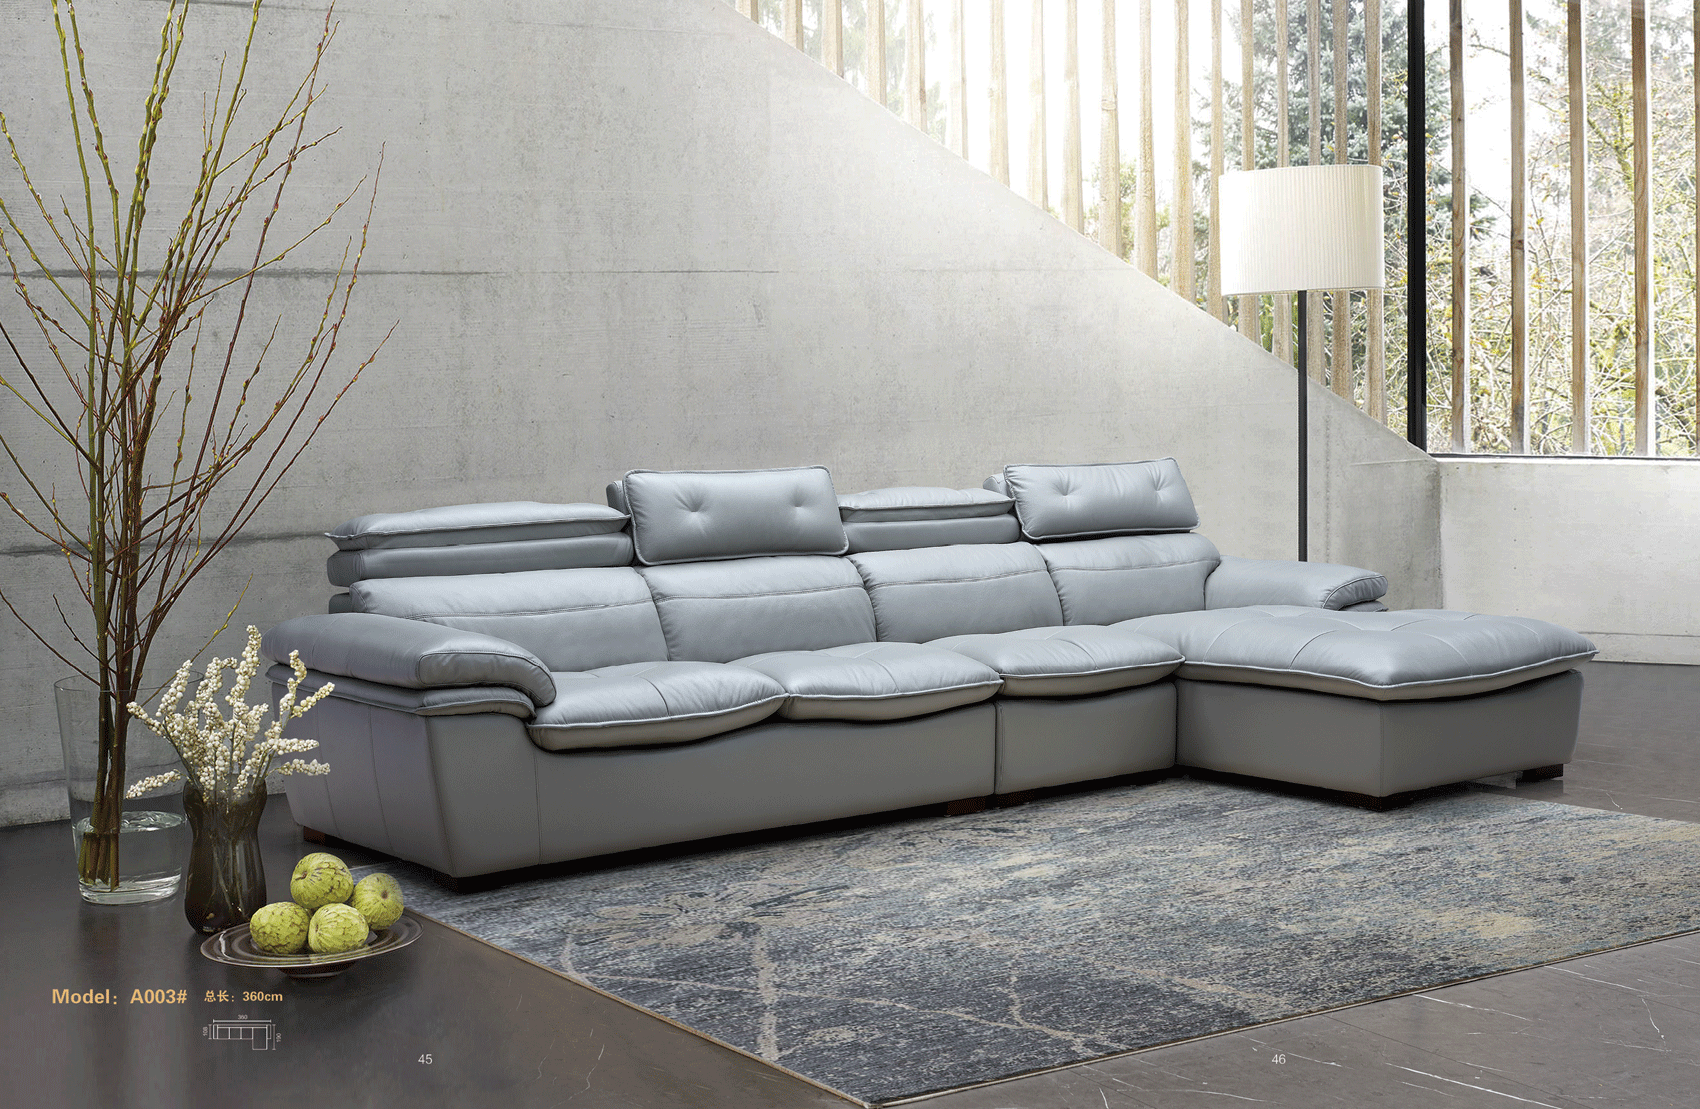 Brands Status Modern Collections, Italy A003 Sectional